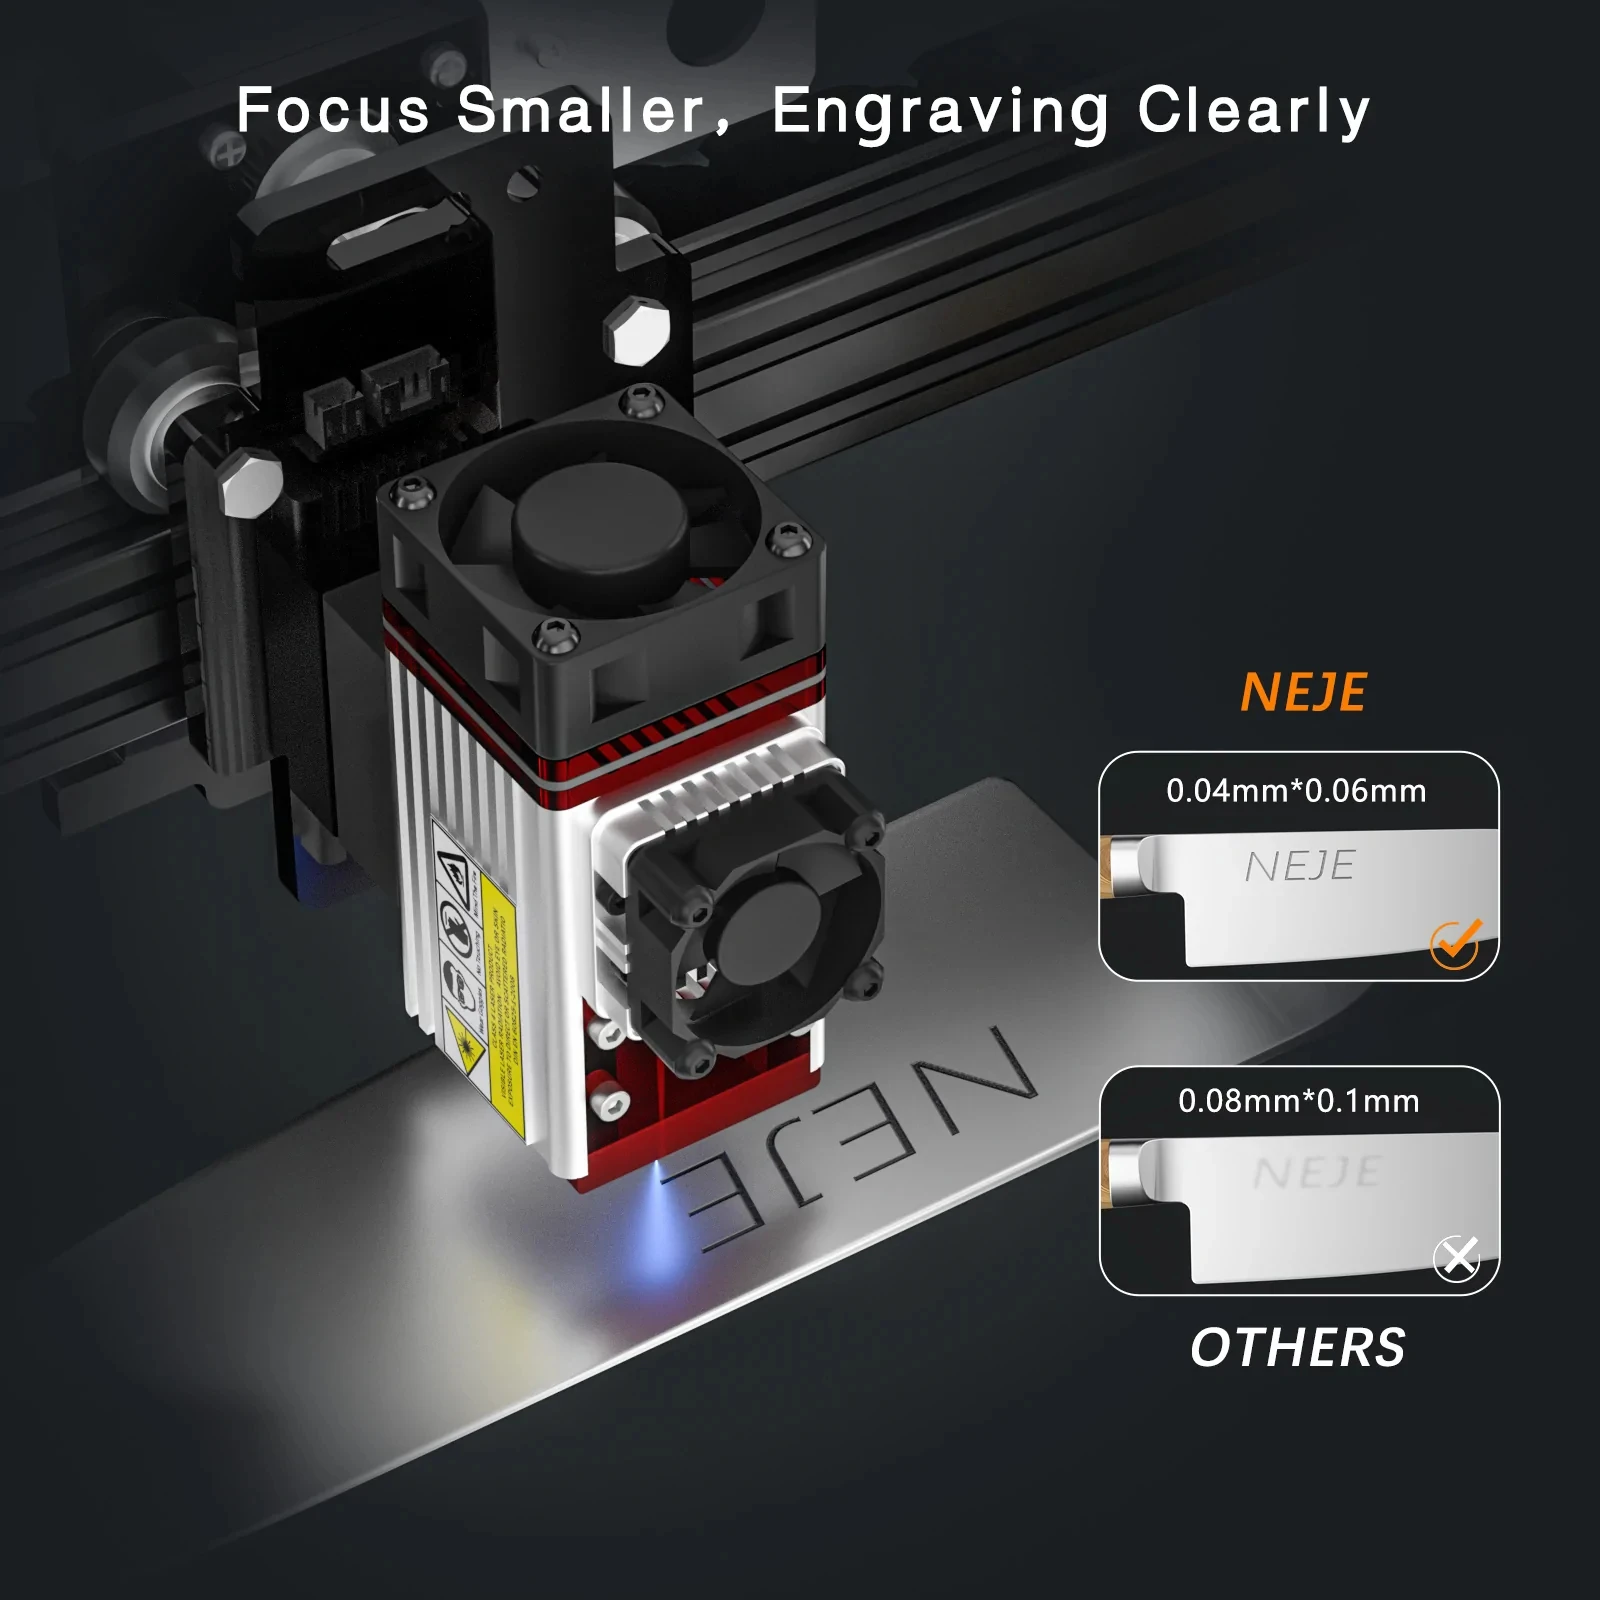 NEJE A40640 80W High Power 450nm Double Beam Laser Module Kit for CNC Laser Engraver Cutter Metal Engraving Wood Cutting Tool enlarge